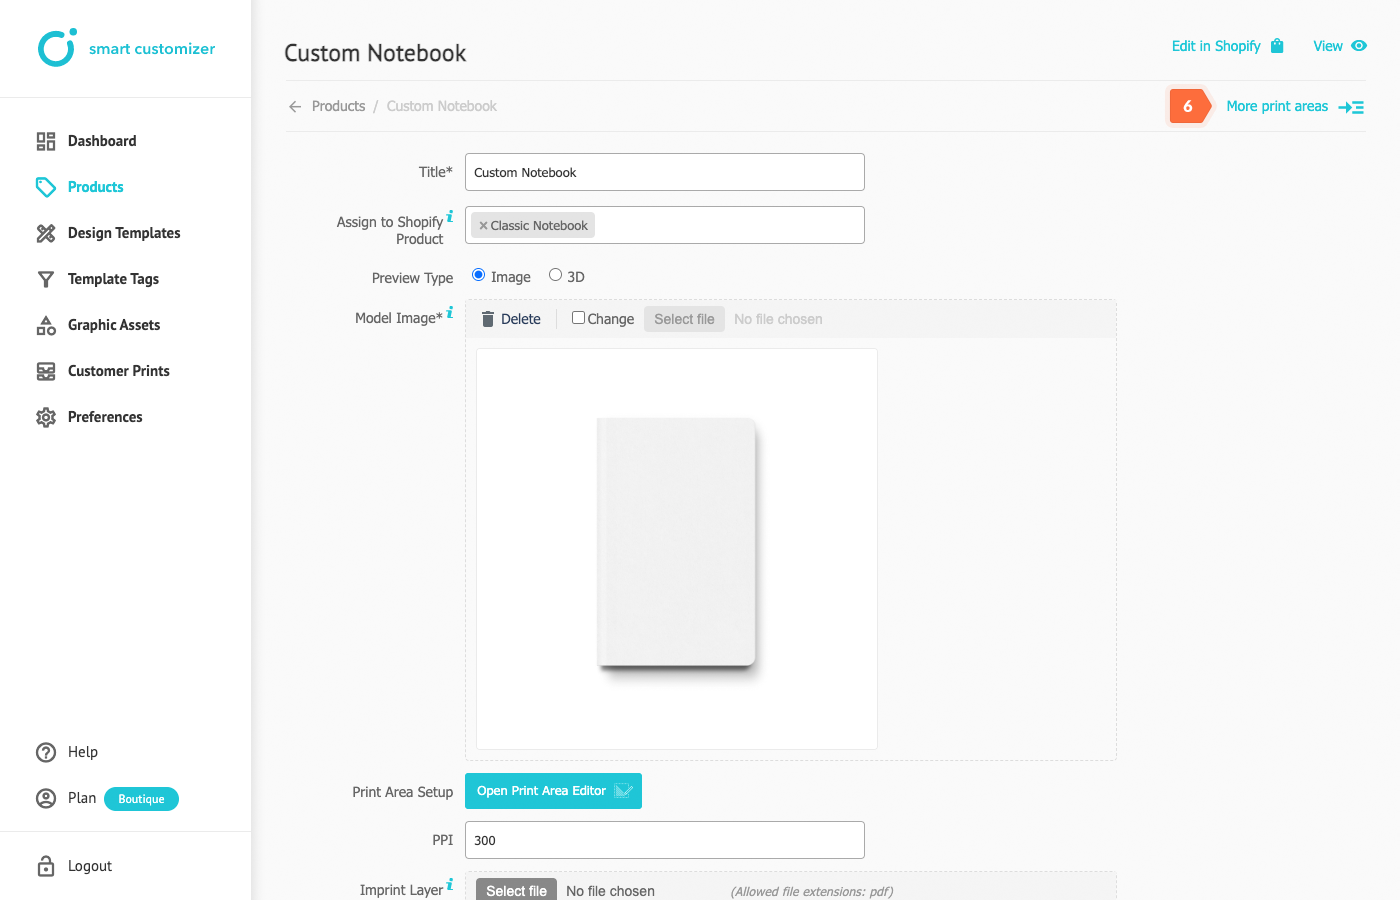 Customizer page for additional print areas